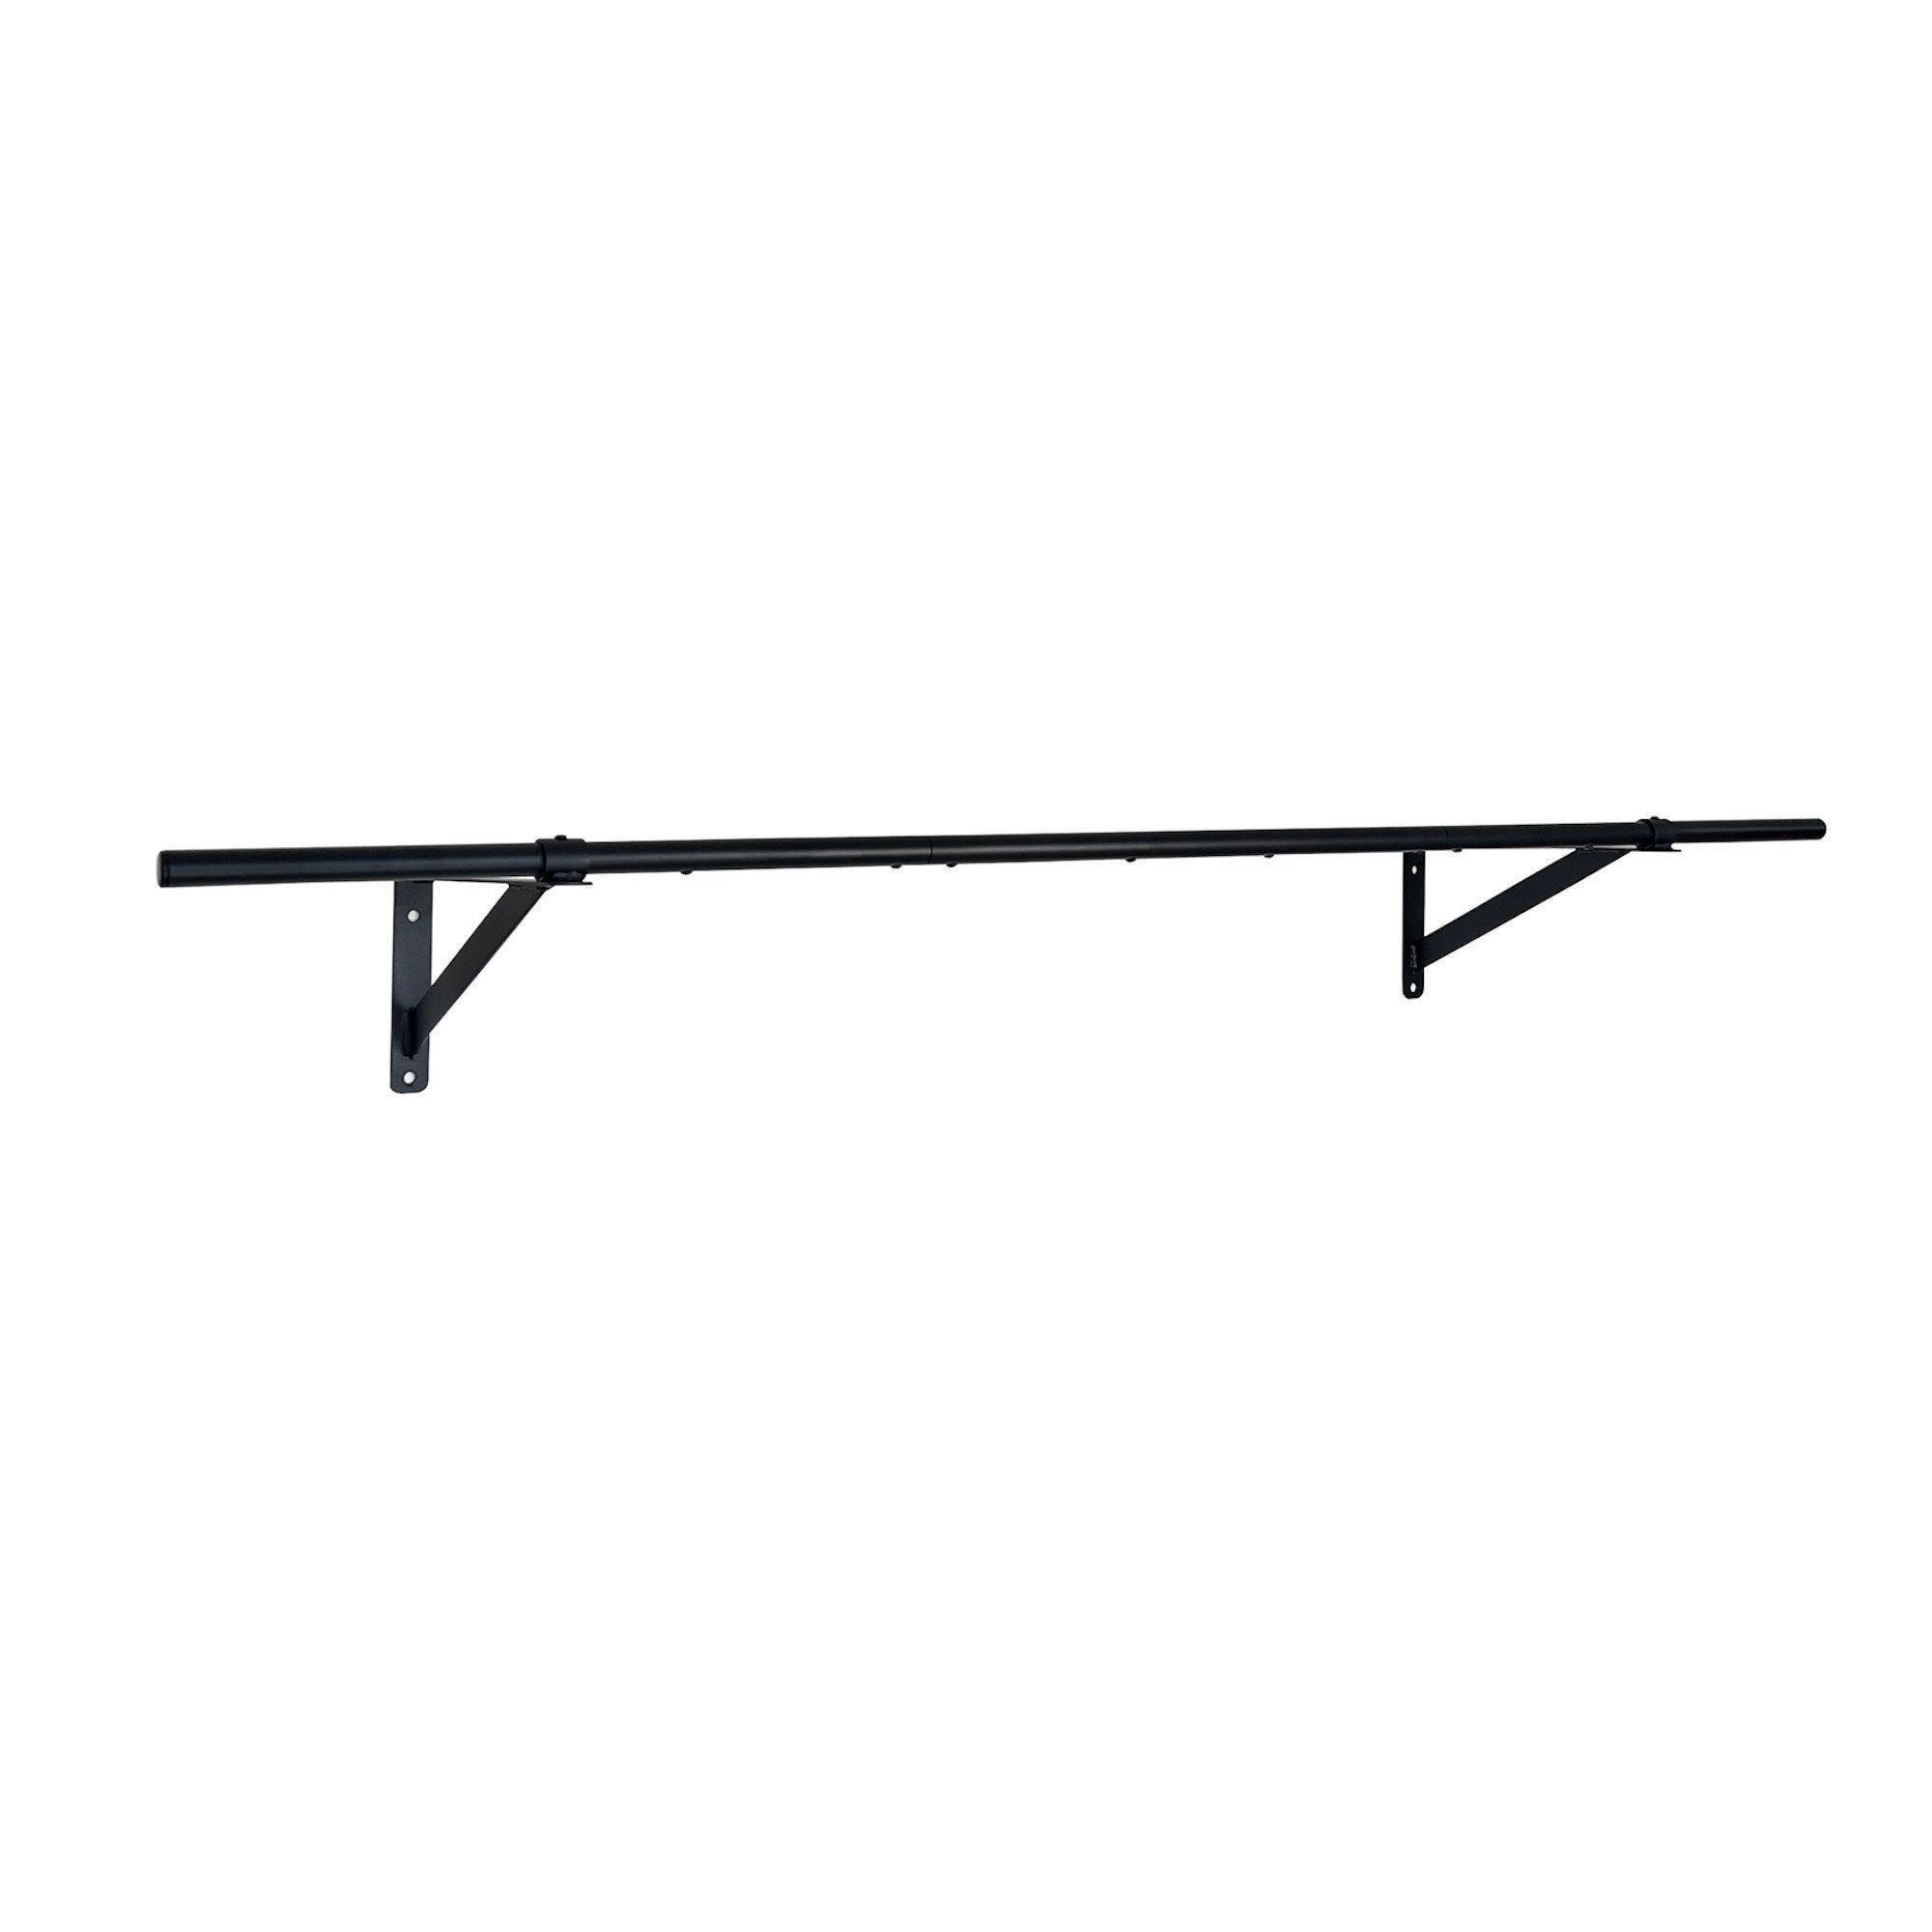 All Metal Super Heavy Wall Mounted Garment Clothes Rail - 5ft - image 1